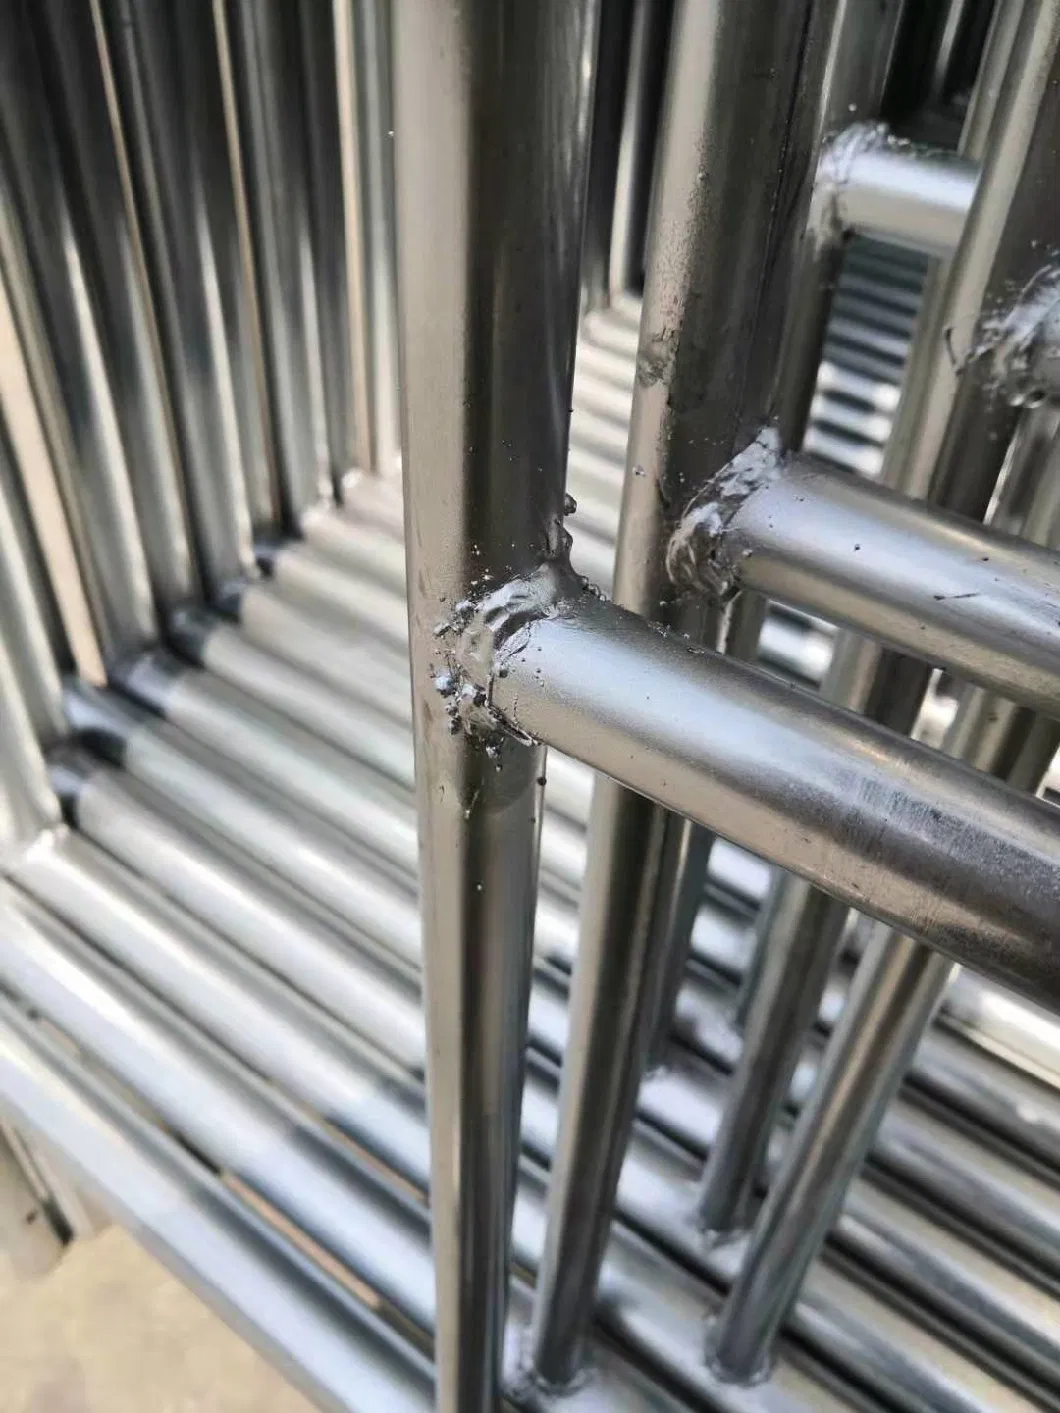 Galvanized Ladder Frame Scaffolding for Construction From China